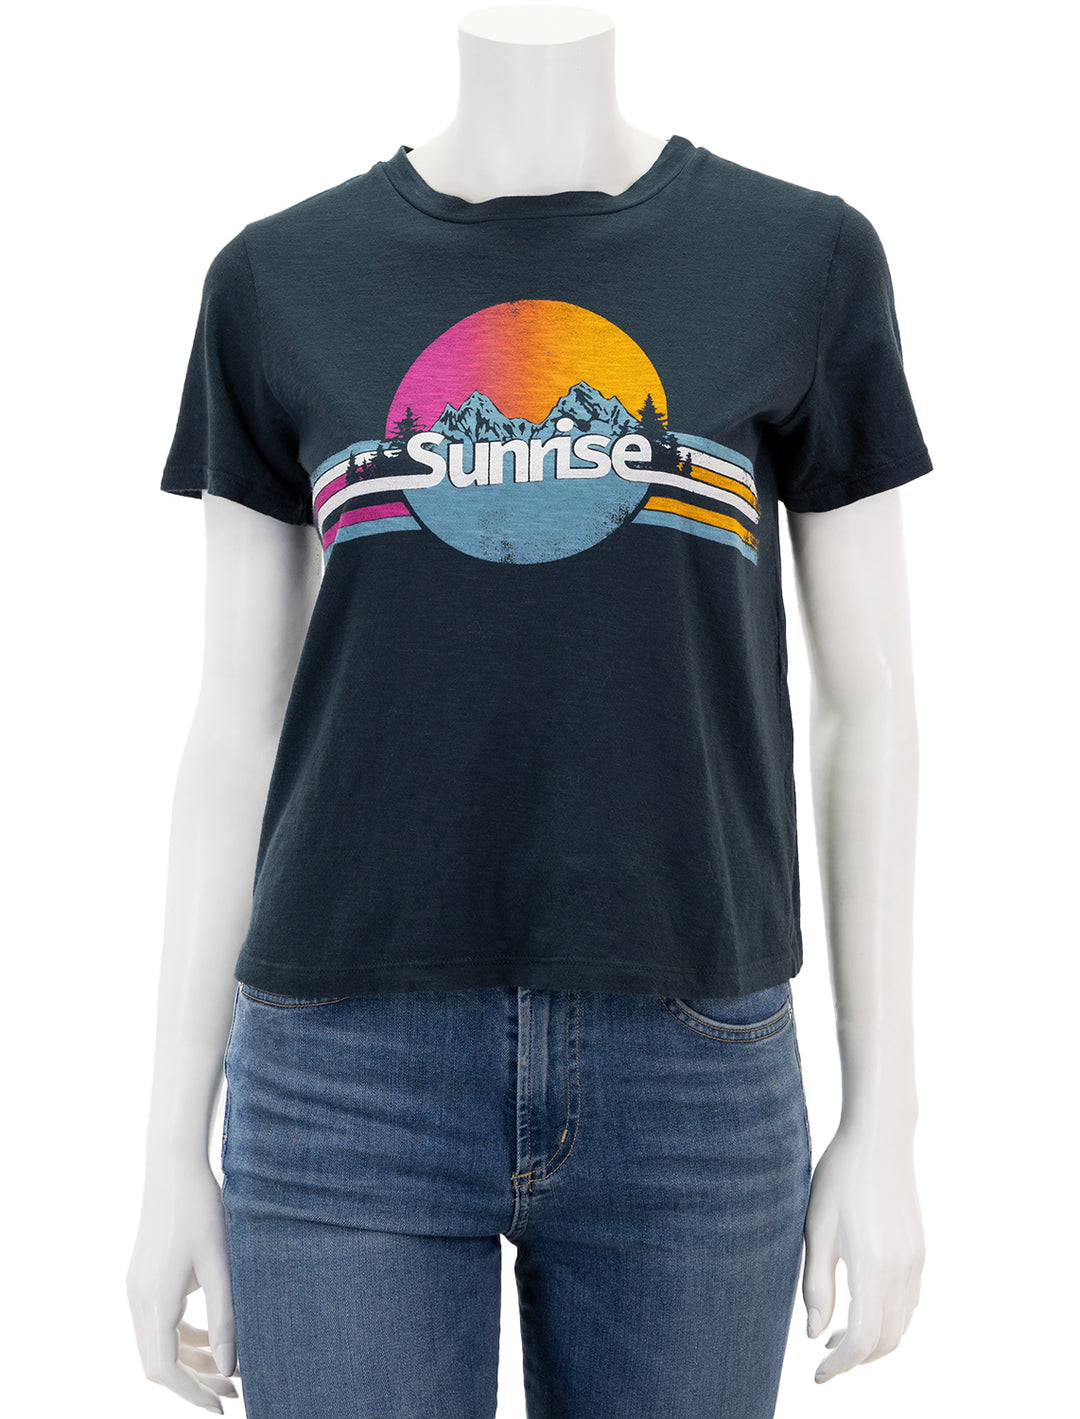 Front view of Sundry's sunrise boxy tee.